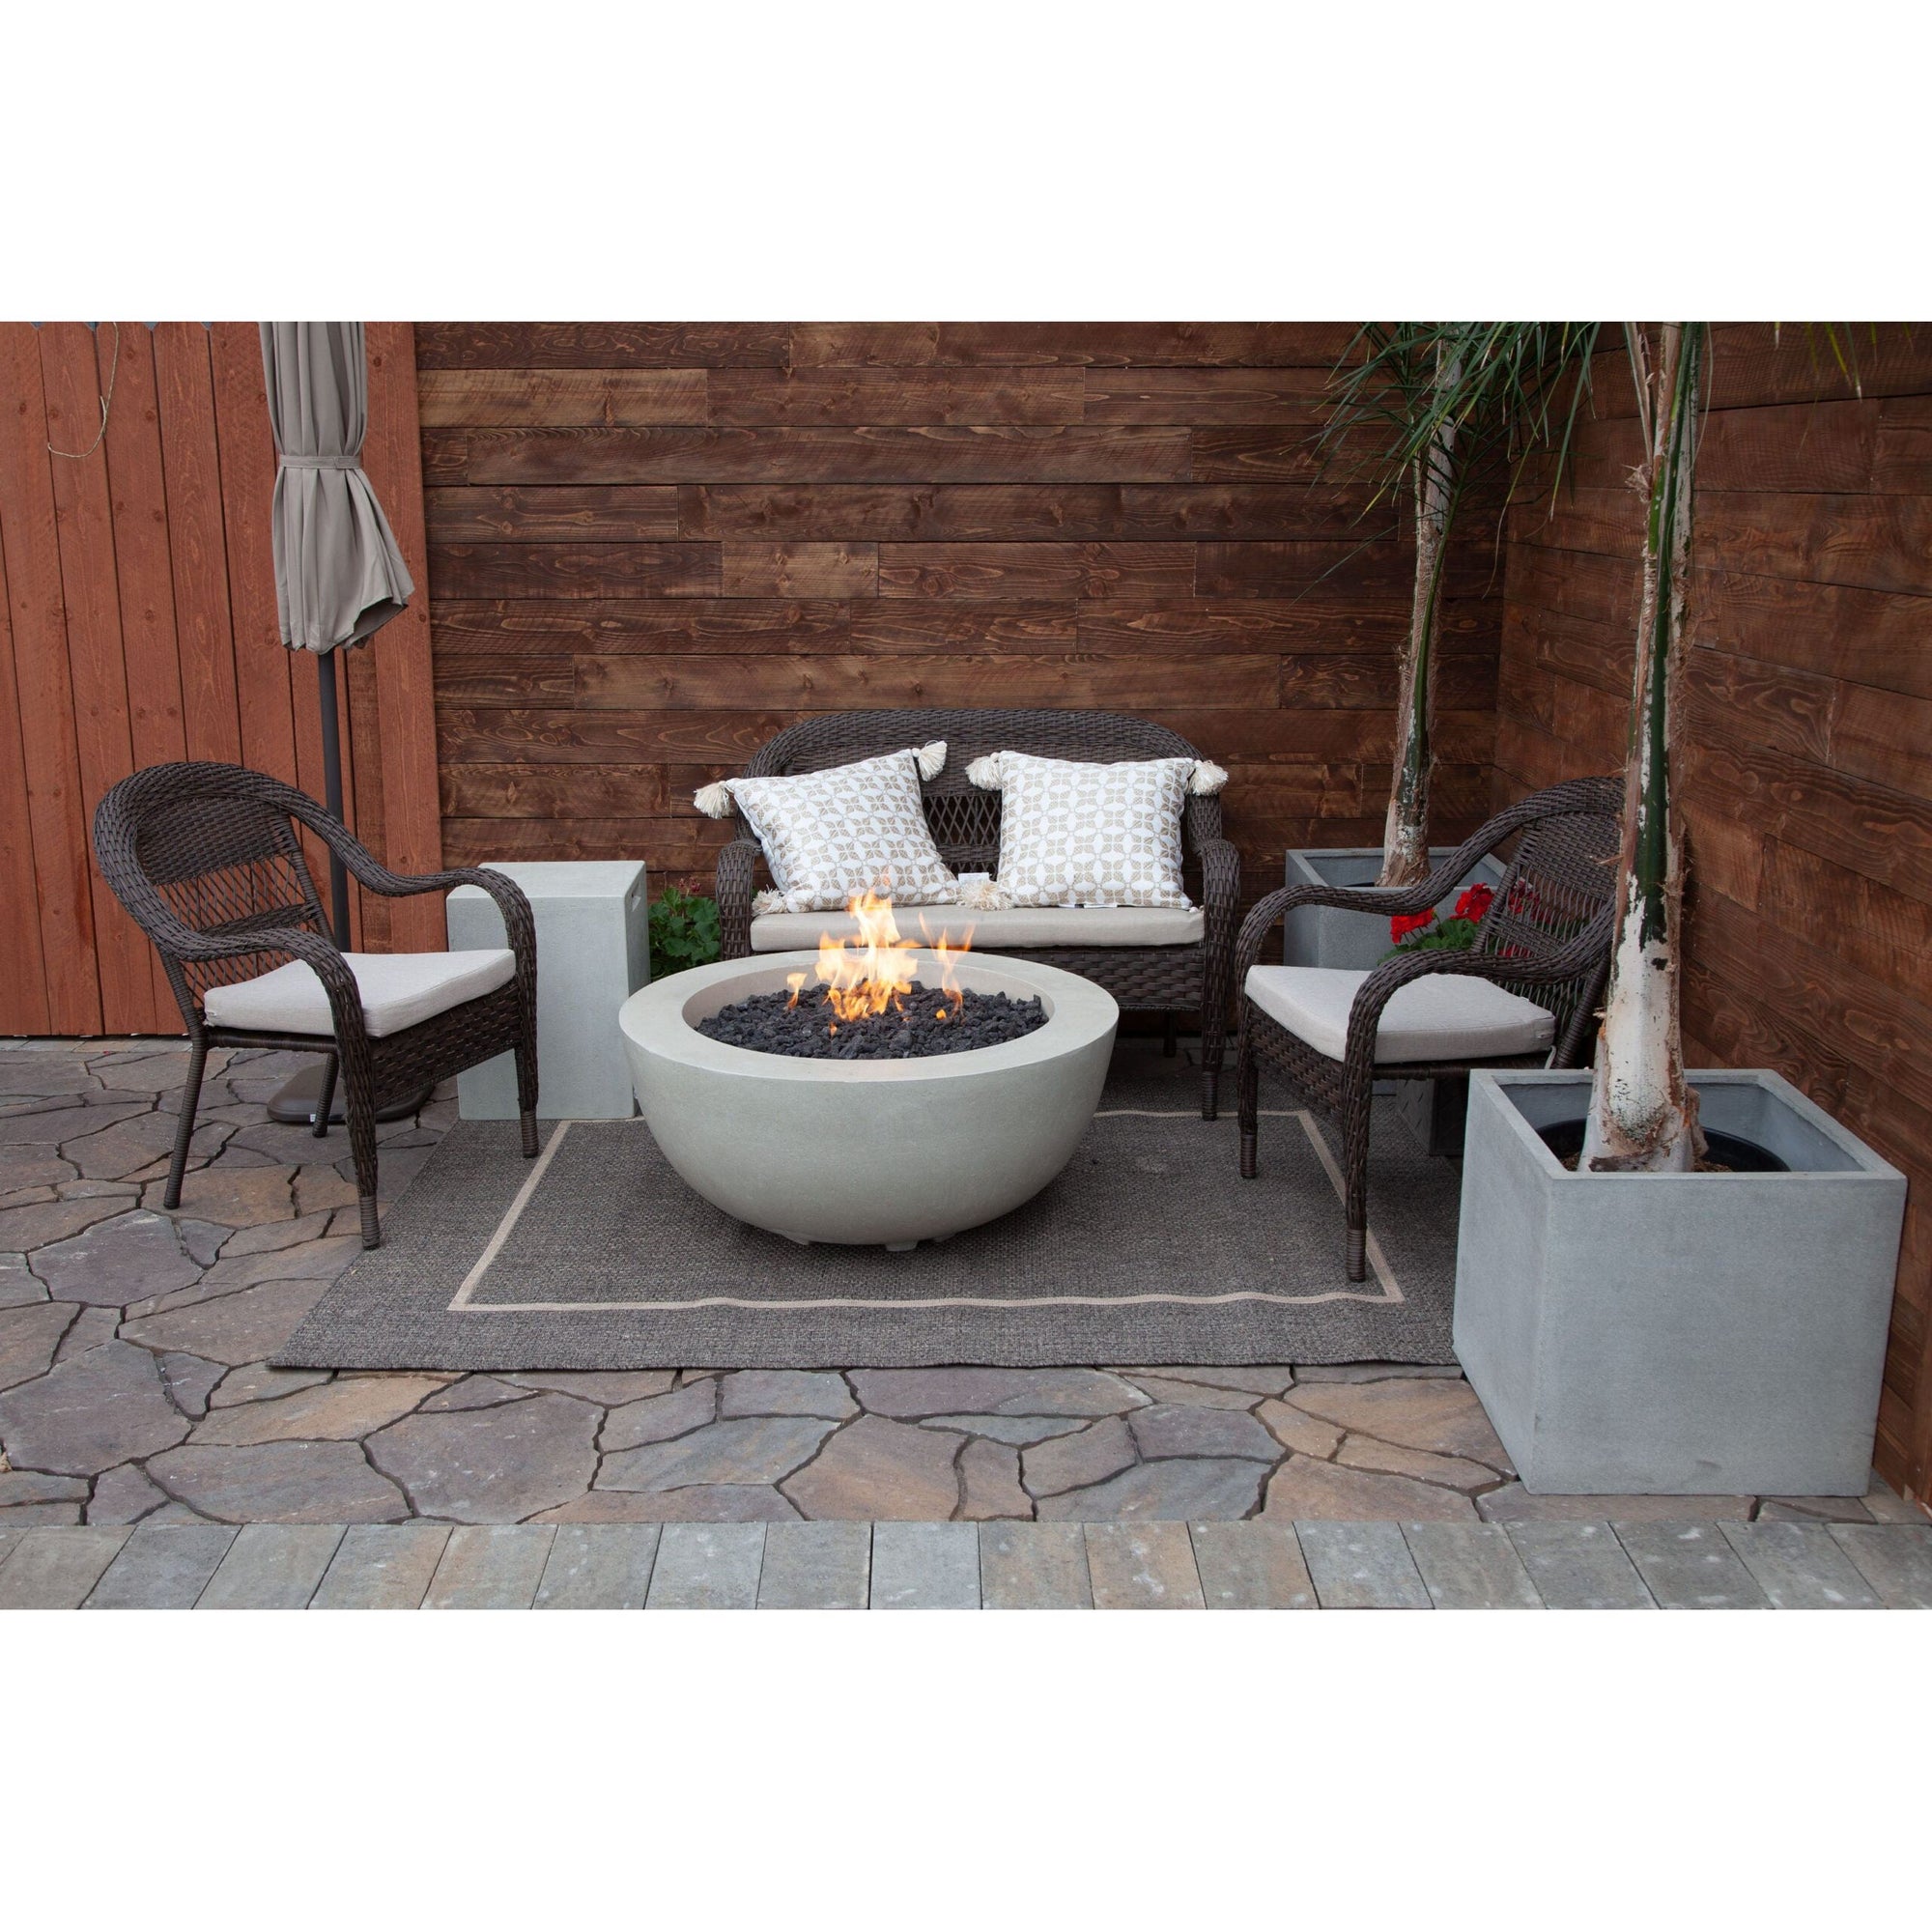 Moderno 8 Fire Pit in GFRC Concrete by Prism Hardscapes - Majestic Fountains